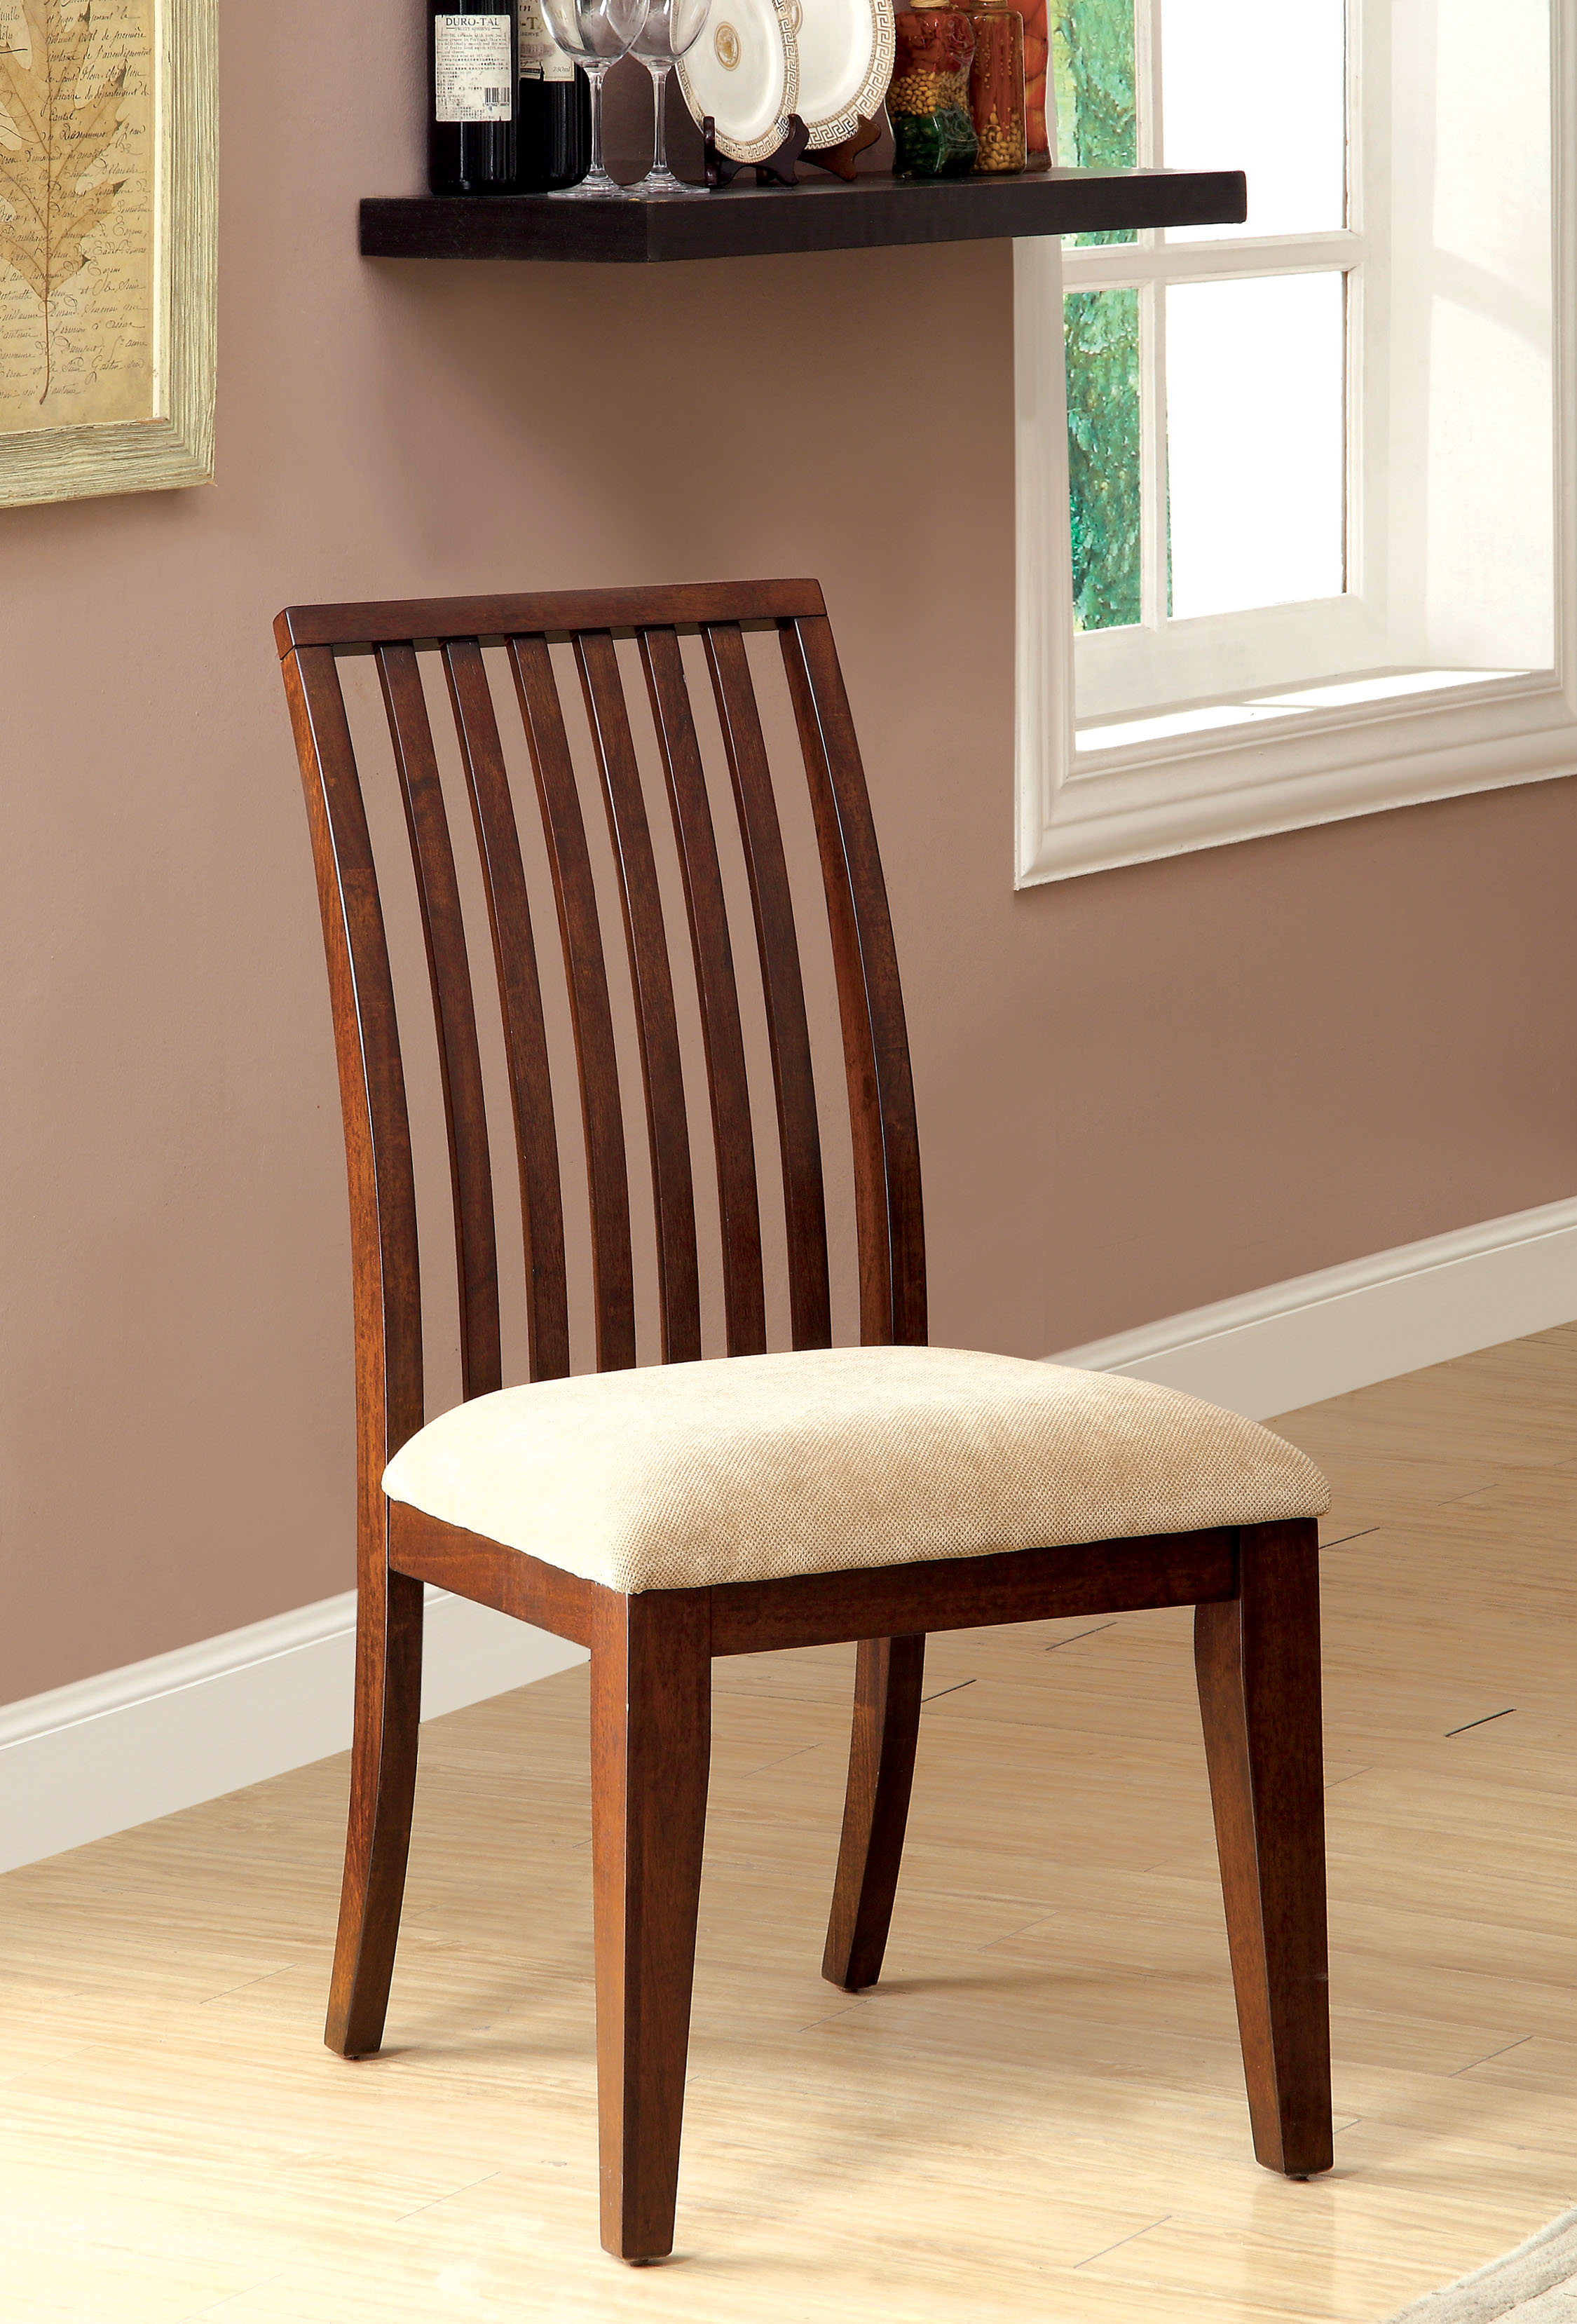 Furniture of America Bavea Brown Cherry Dining Chair (Set of 2)